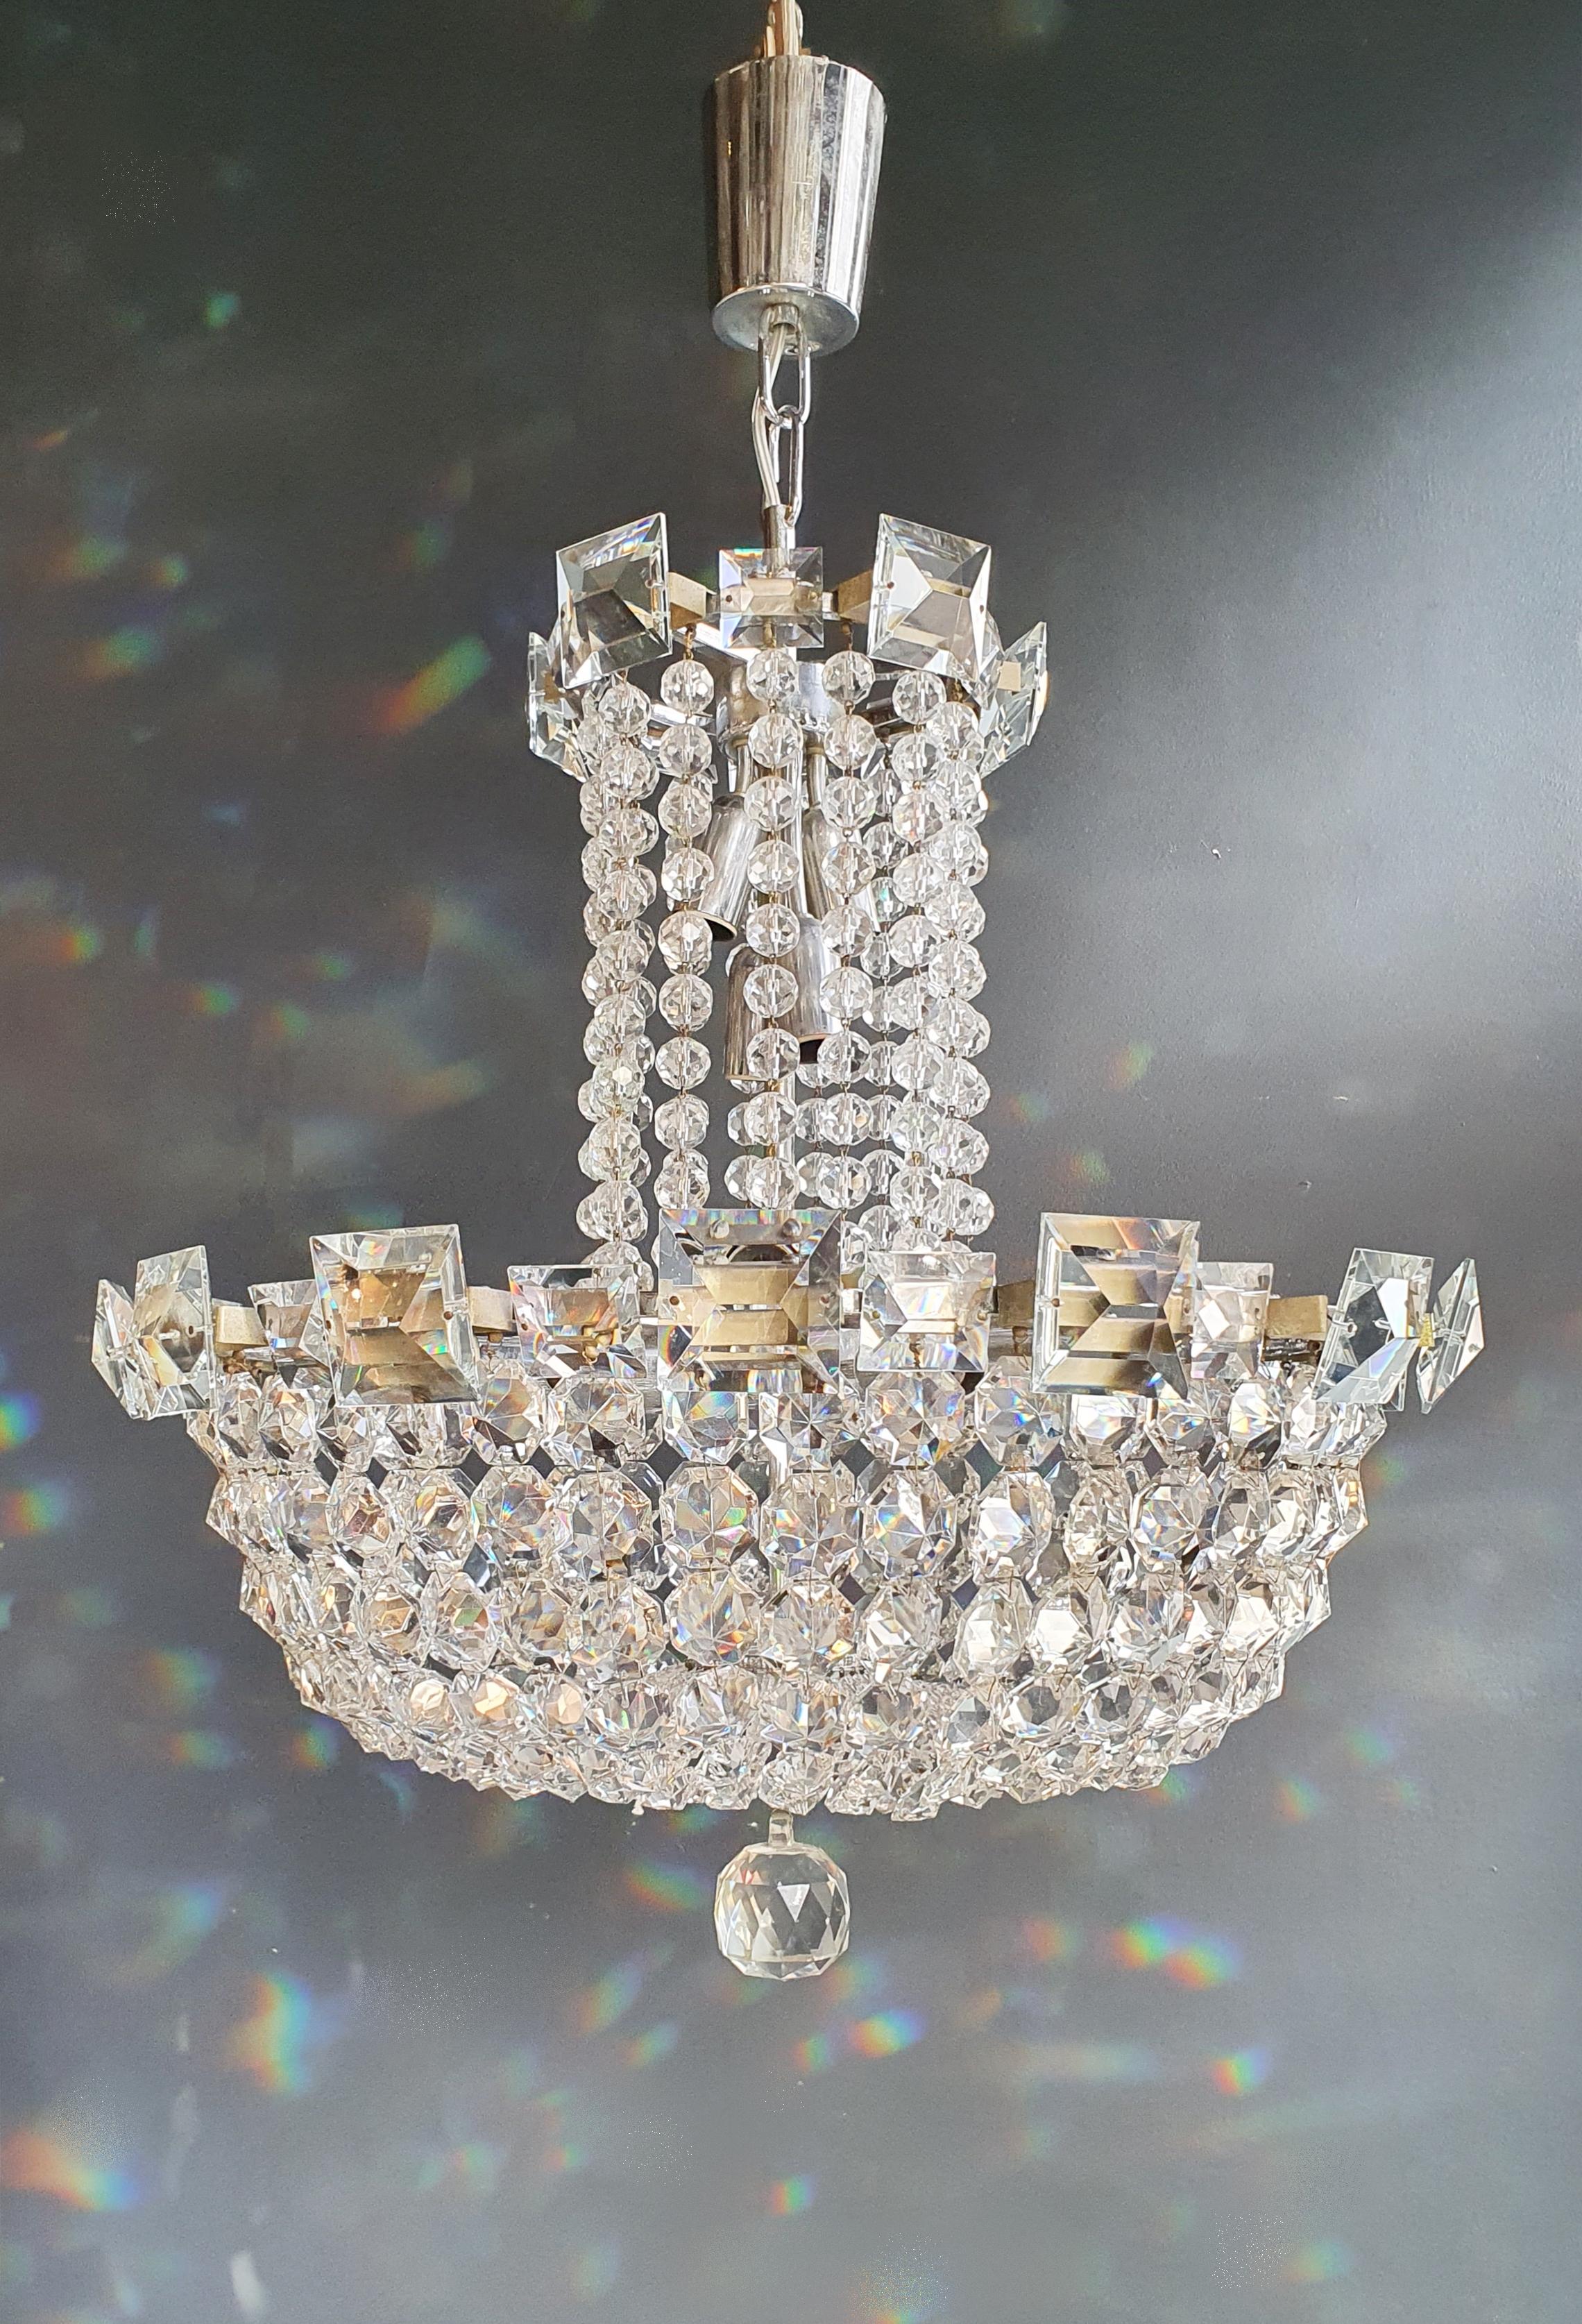 Exquisitely Restored Antique Chandelier with Modern Art Deco Elegance

Experience the perfect fusion of history and contemporary allure with our meticulously restored antique chandelier. Lovingly revived in Berlin, this masterpiece has been